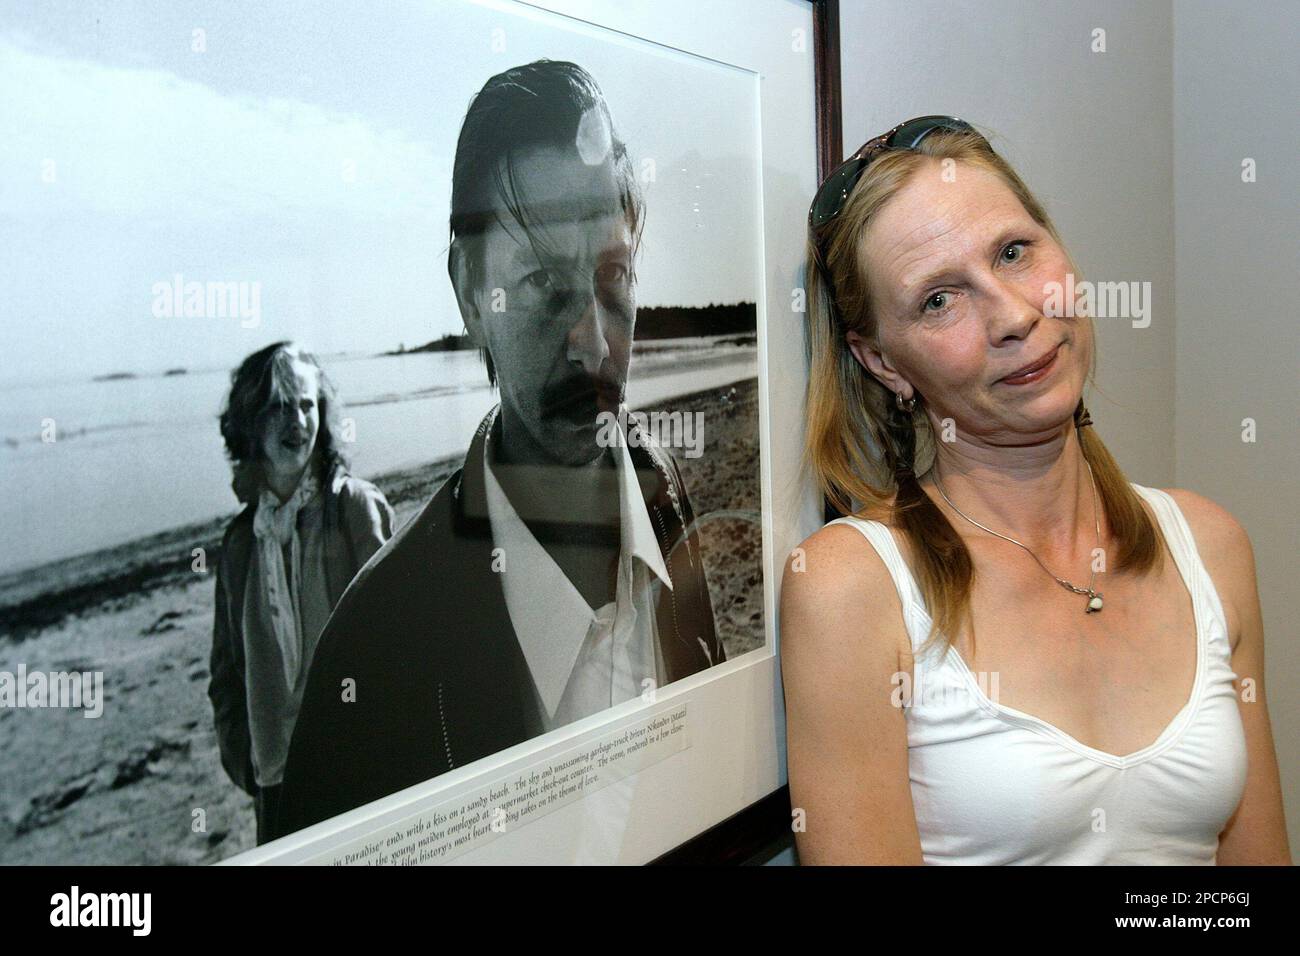 Finnish actress Kati Outinen poses next to a photograph showing her together with actor Matti Pellonpaeae on the set of Aki Kaurismaeki's "Shadows in Paradise" (1986), during the inauguration of the photo exhibition "Shadows in Paradise", at the 59th International Film Festival Locarno, Thursday, August 3, 2006, in Locarno, Switzerland. To accompany the Aki Kaurismaeki Retrospective at the film festival, an exhibition of photographs by Marja-Leena Hukkanen, who followed the work of the Finnish filmmaker on set, is shown at Casa Rusca in Locarno. (KEYSTONE/Martial Trezzini) Stock Photo